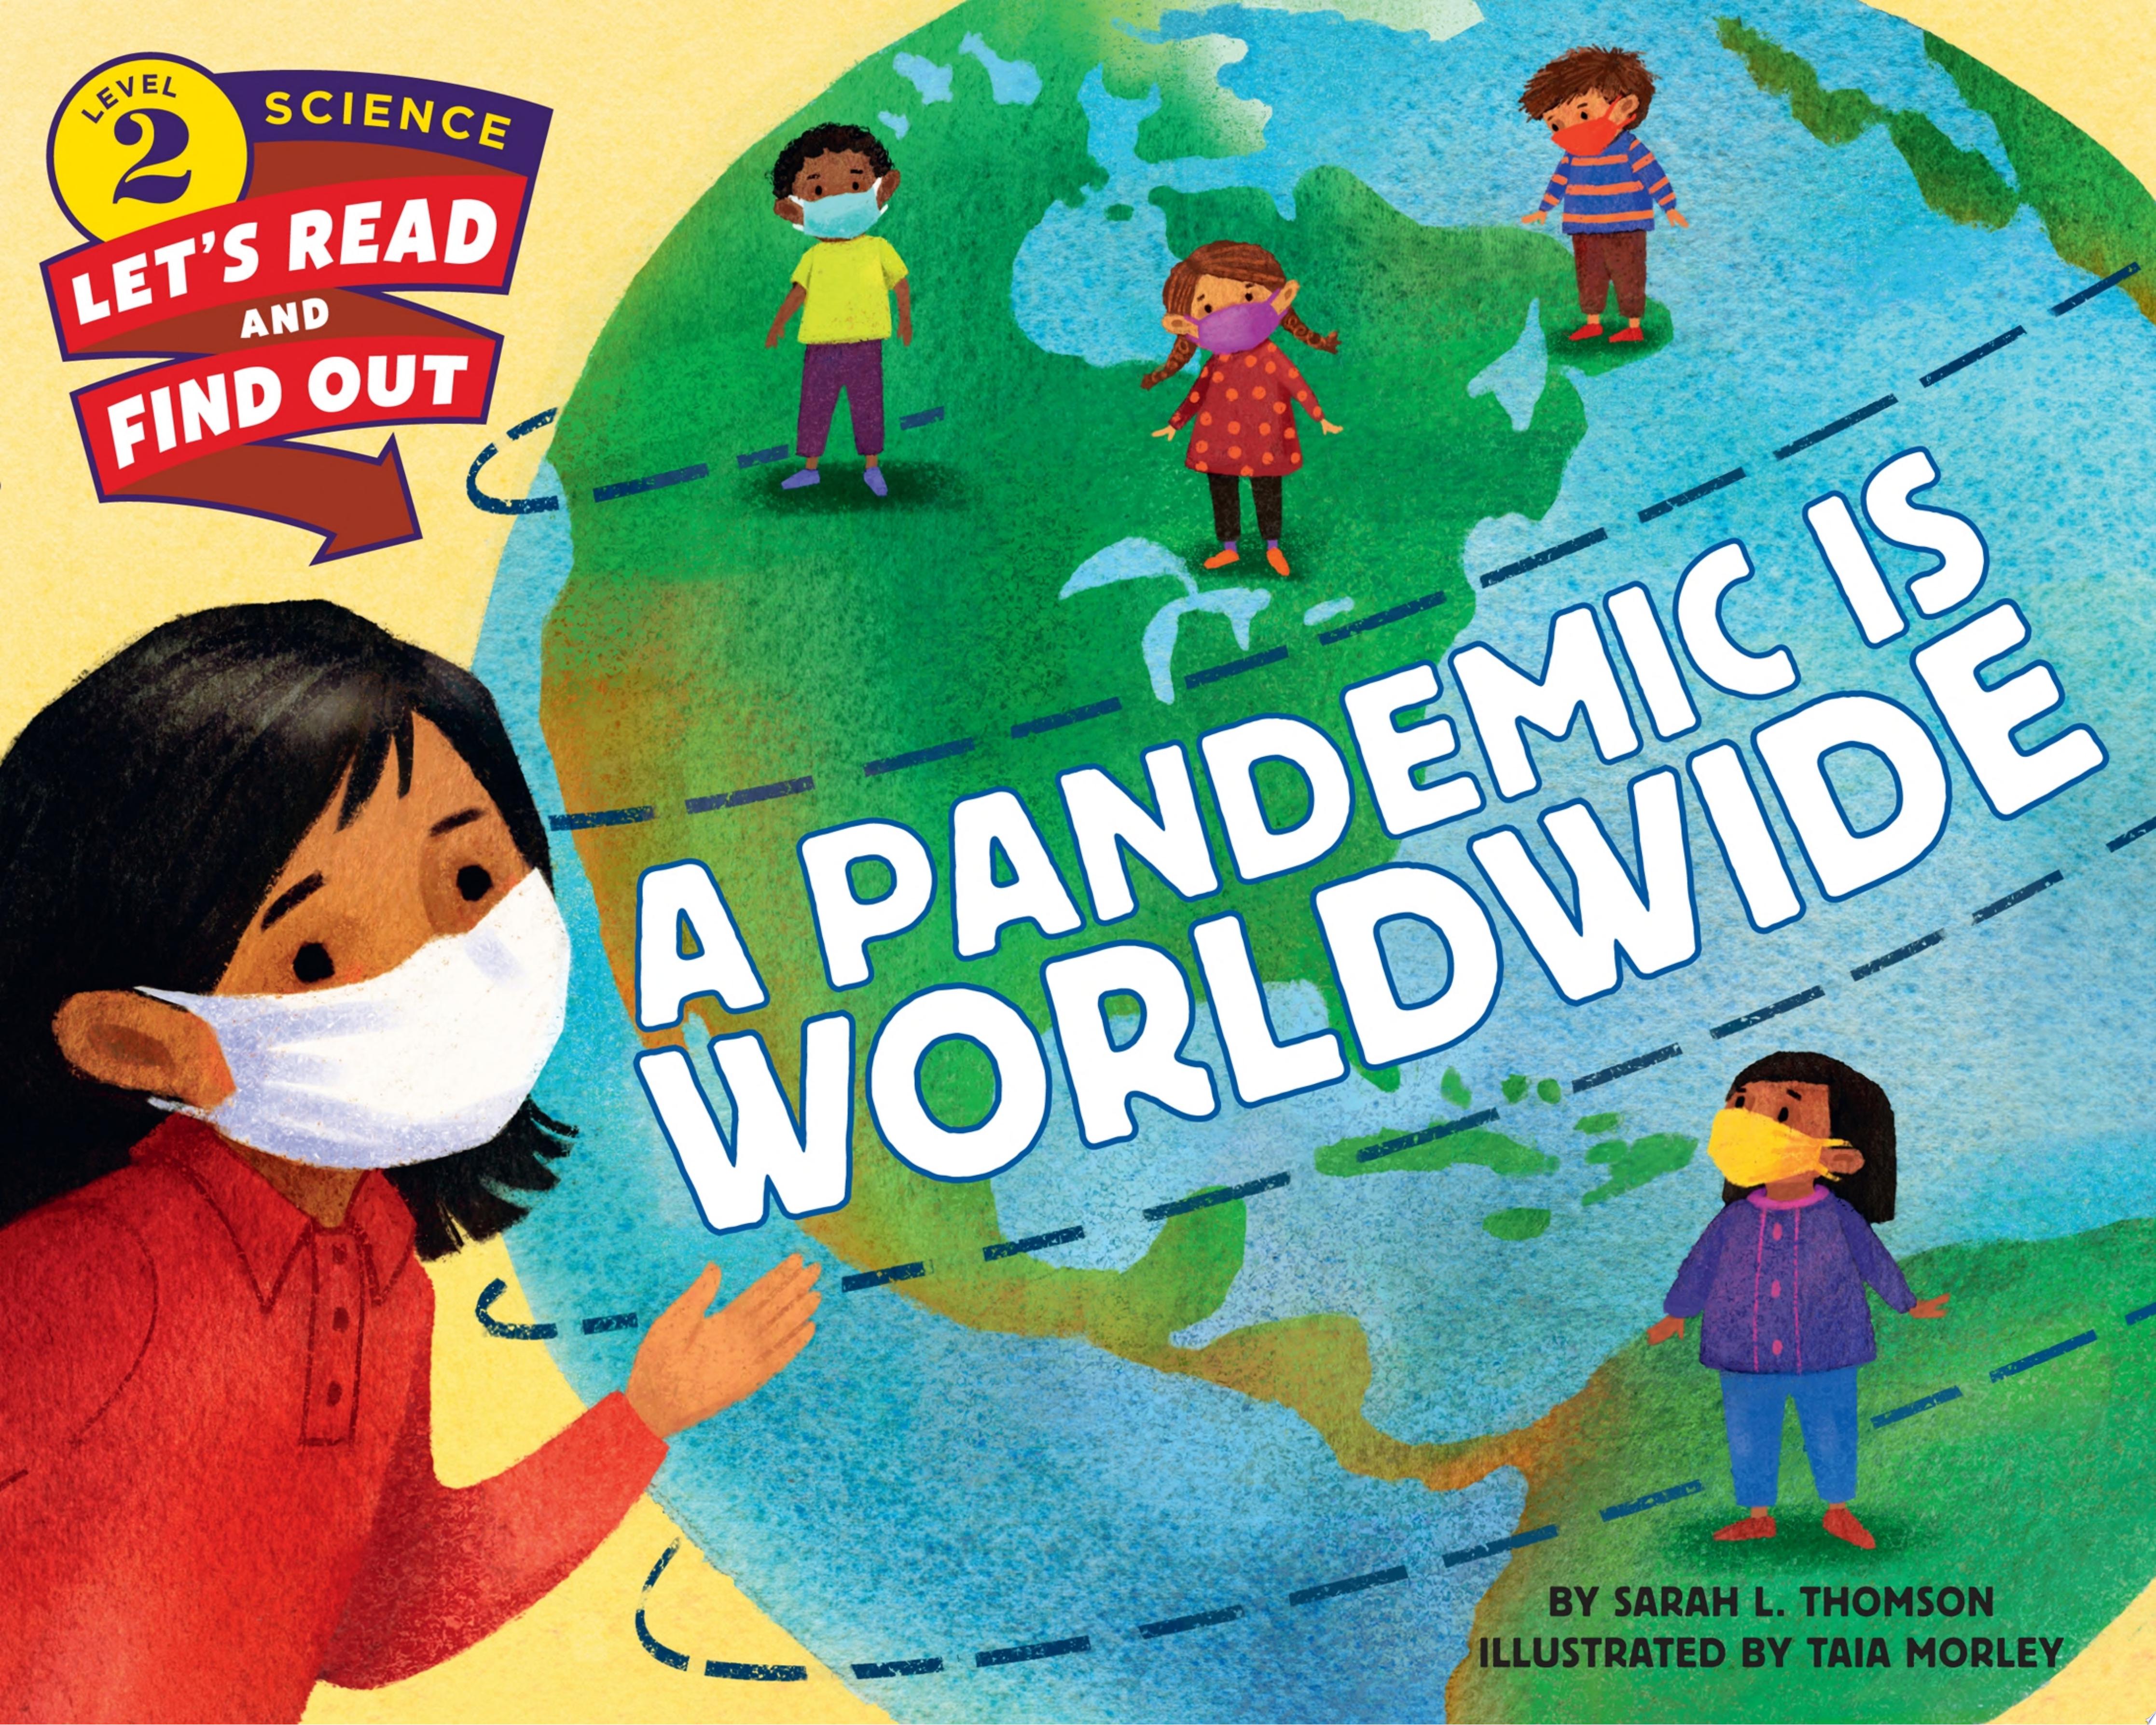 Image for "A Pandemic Is Worldwide"